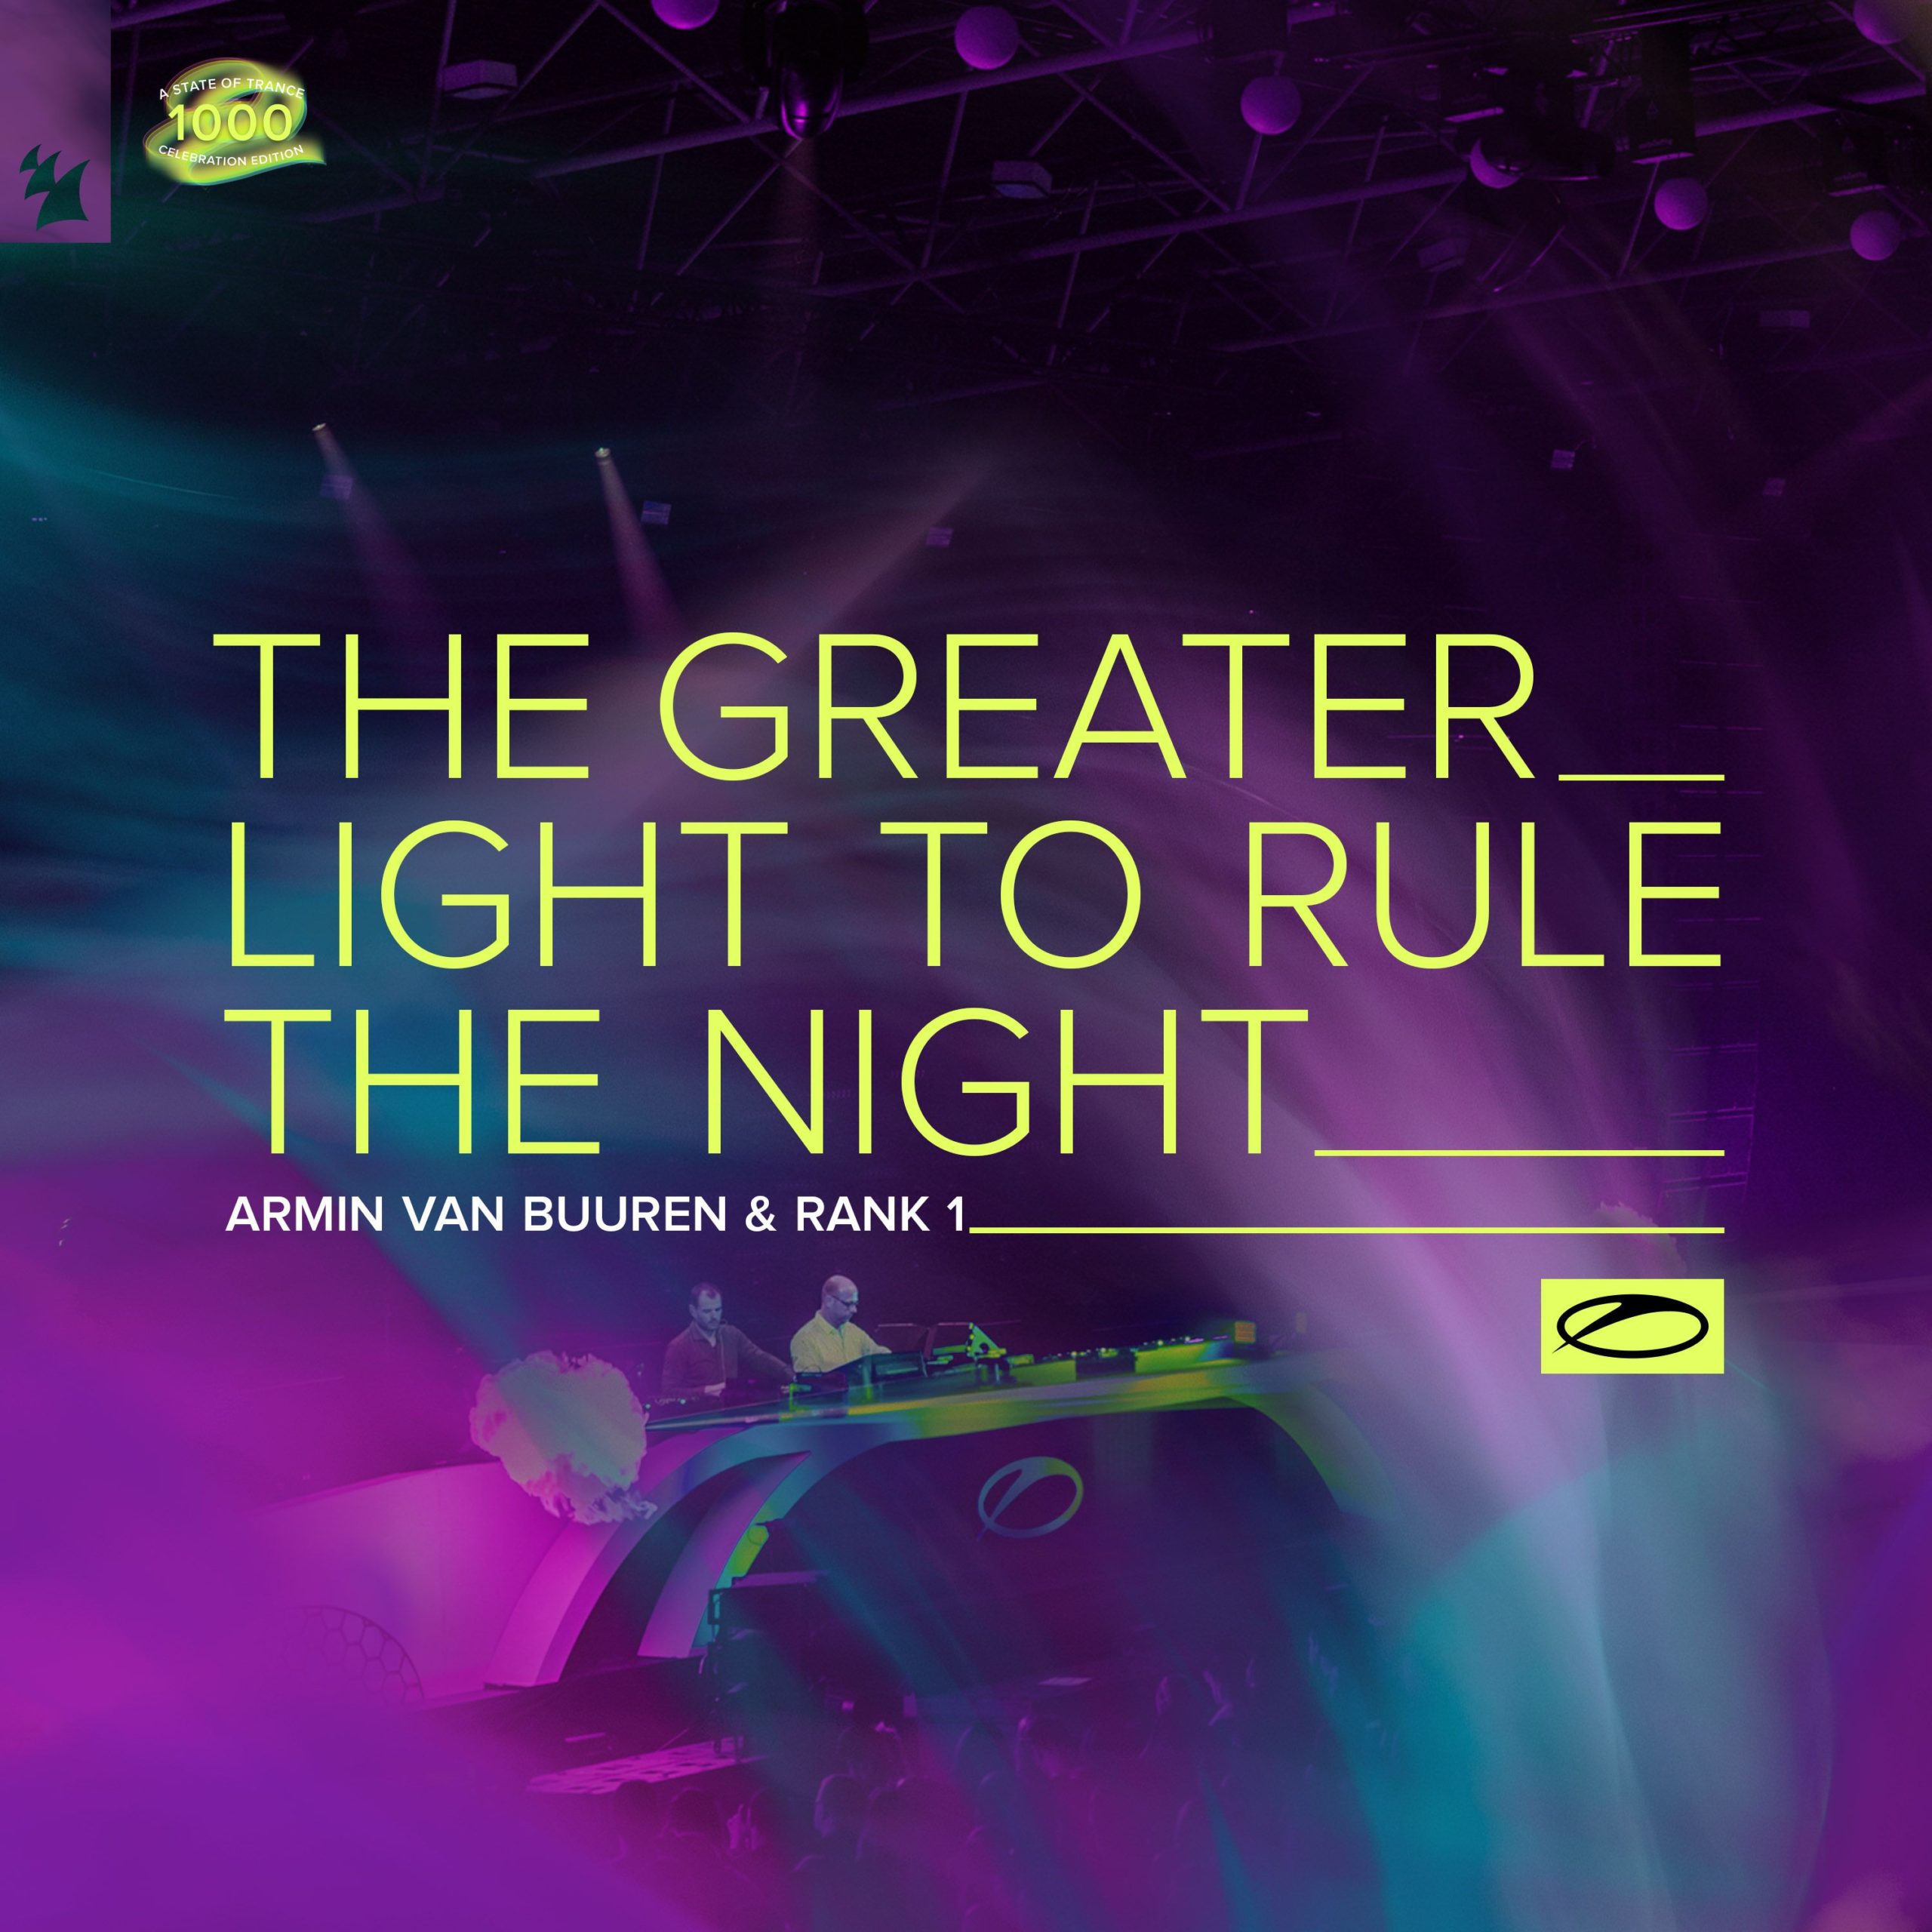 Armin van Buuren and Rank1 presents The Greater Light To Rule The Night on A State Of Trance